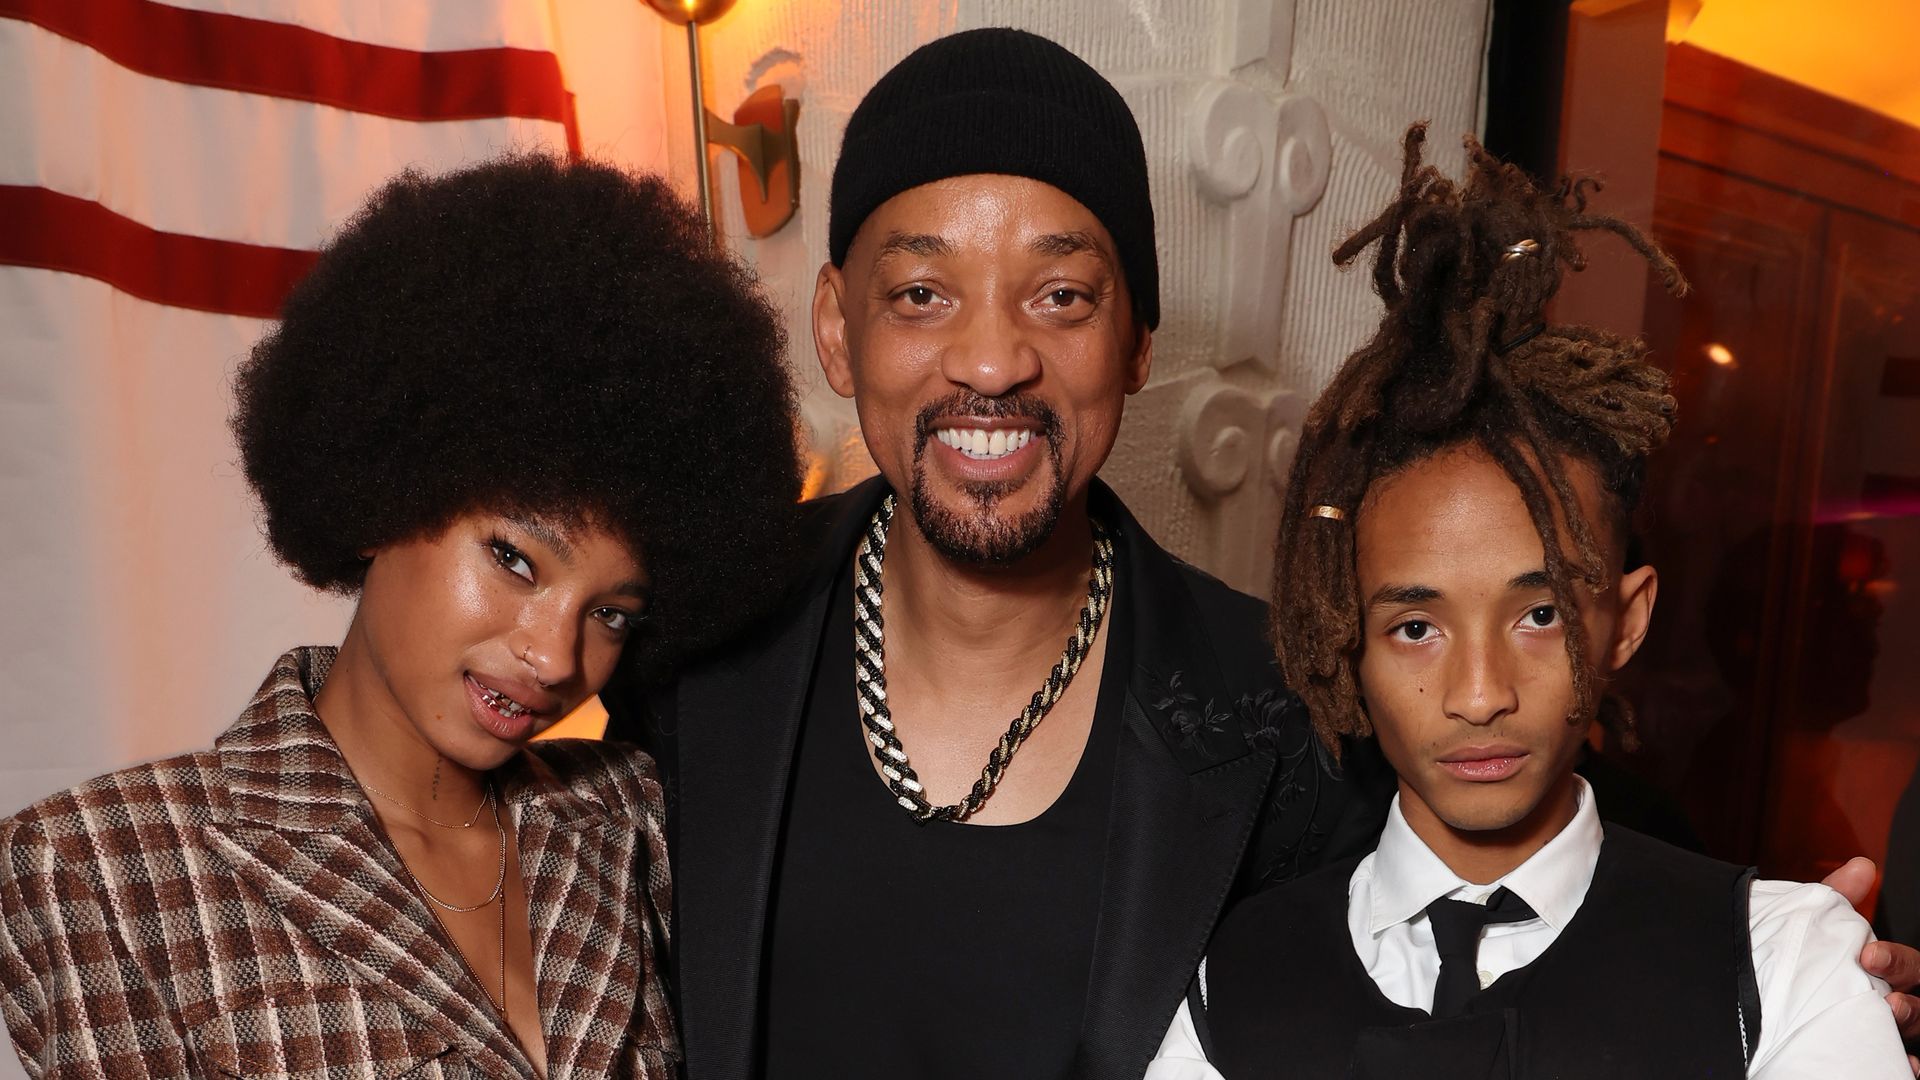 Inside Jaden Smith's Bahamas getaway for 26th birthday with sister Willow Smith — photos